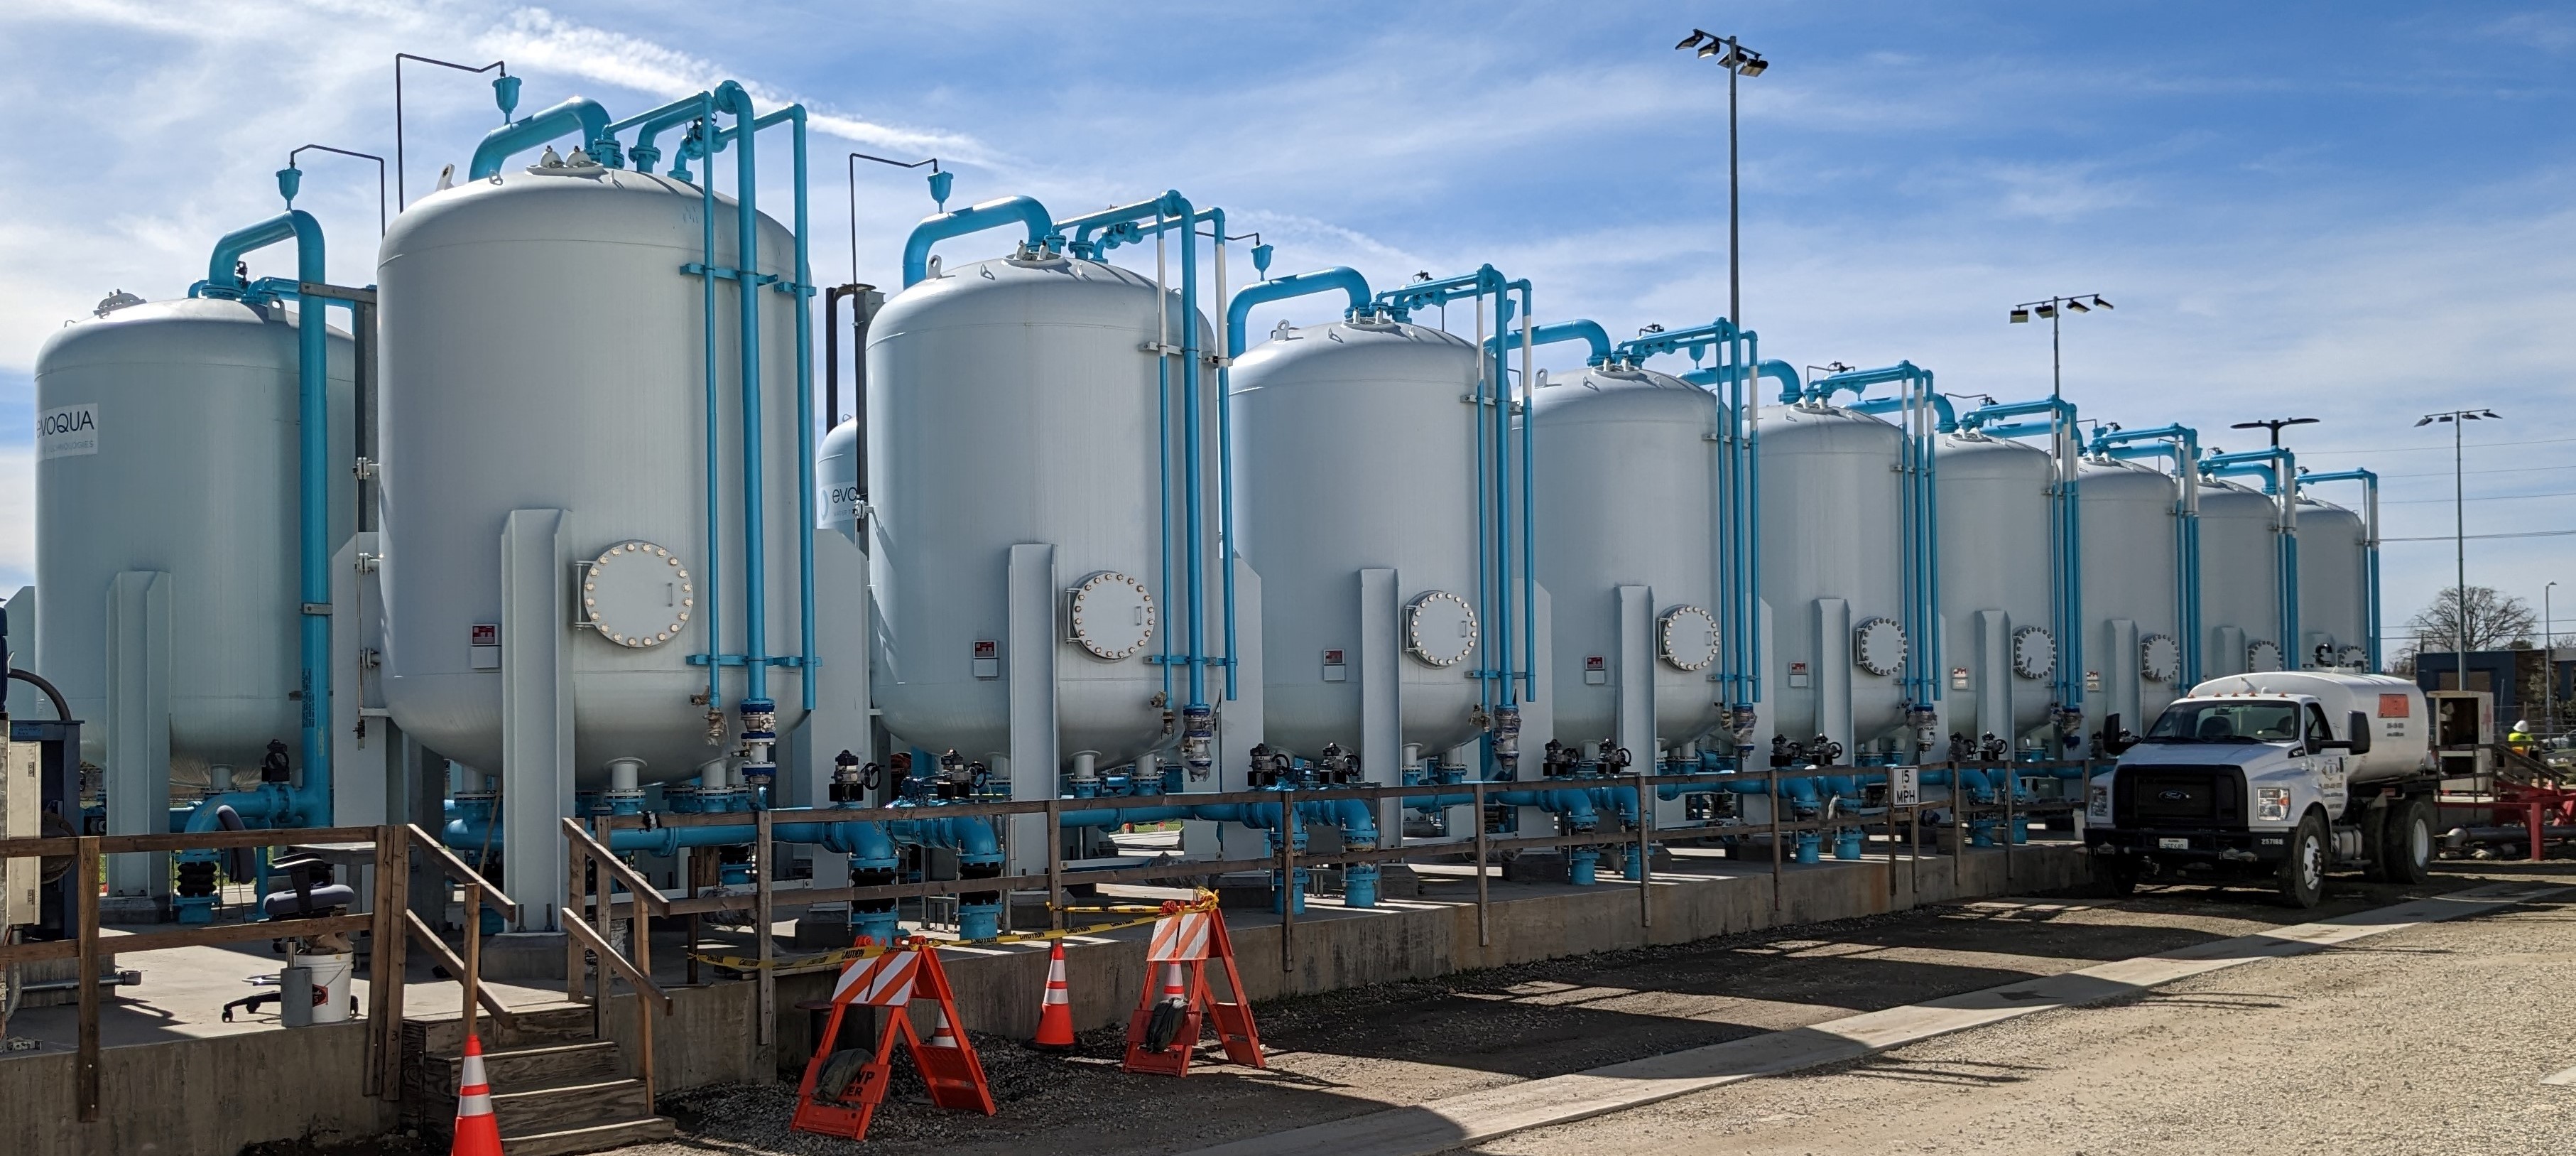 A groundwater remediation site in southern California with over 10 storage tanks.